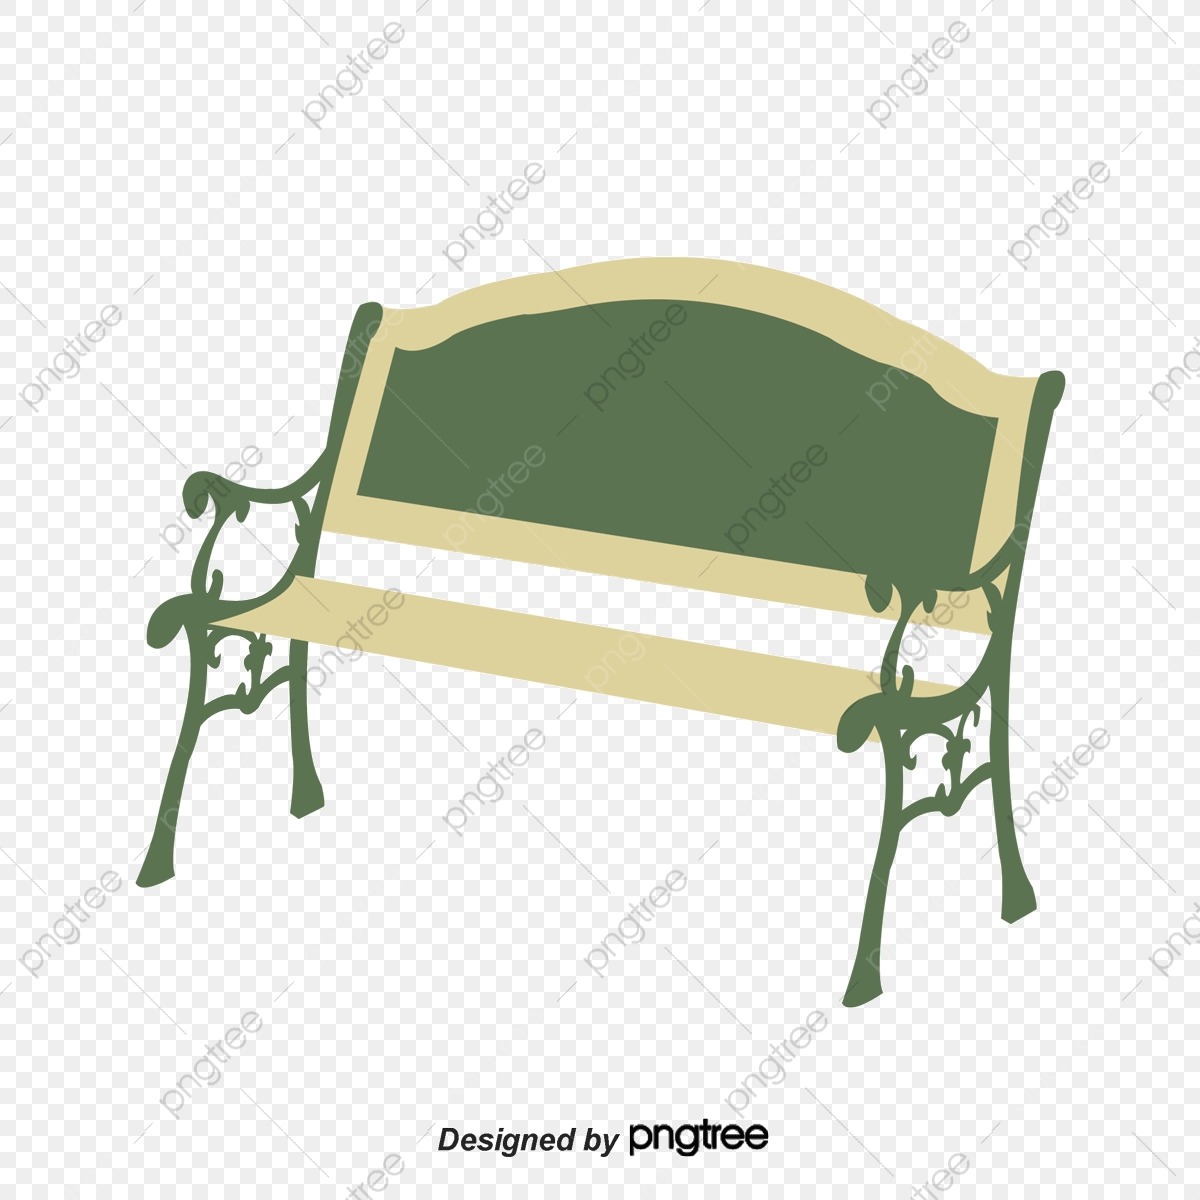 Park Bench Chair Furniture, Furniture Clipart, Park, Bench PNG.